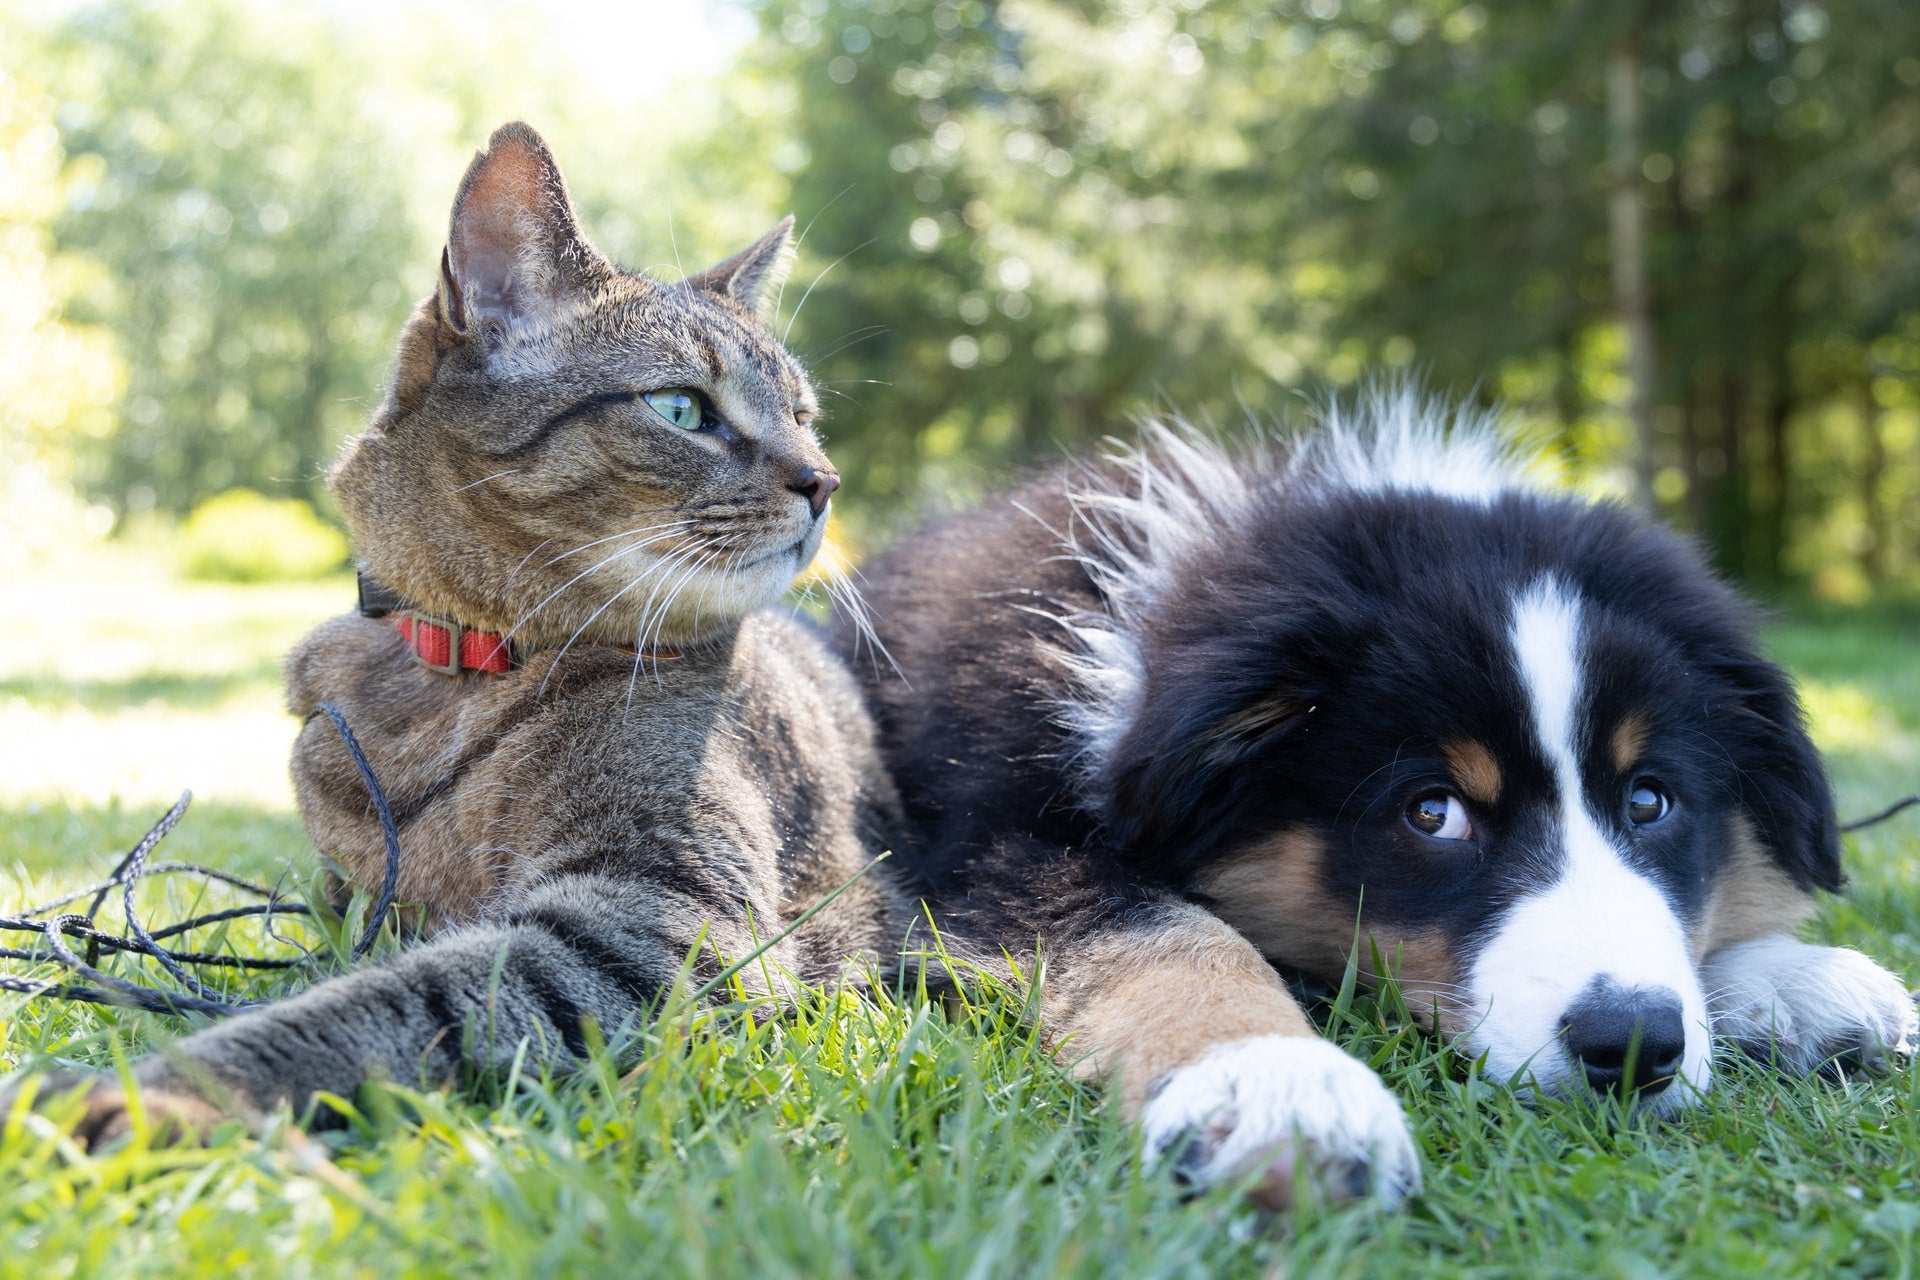 How Long Do Dogs, Cats, and Other Pets Live?